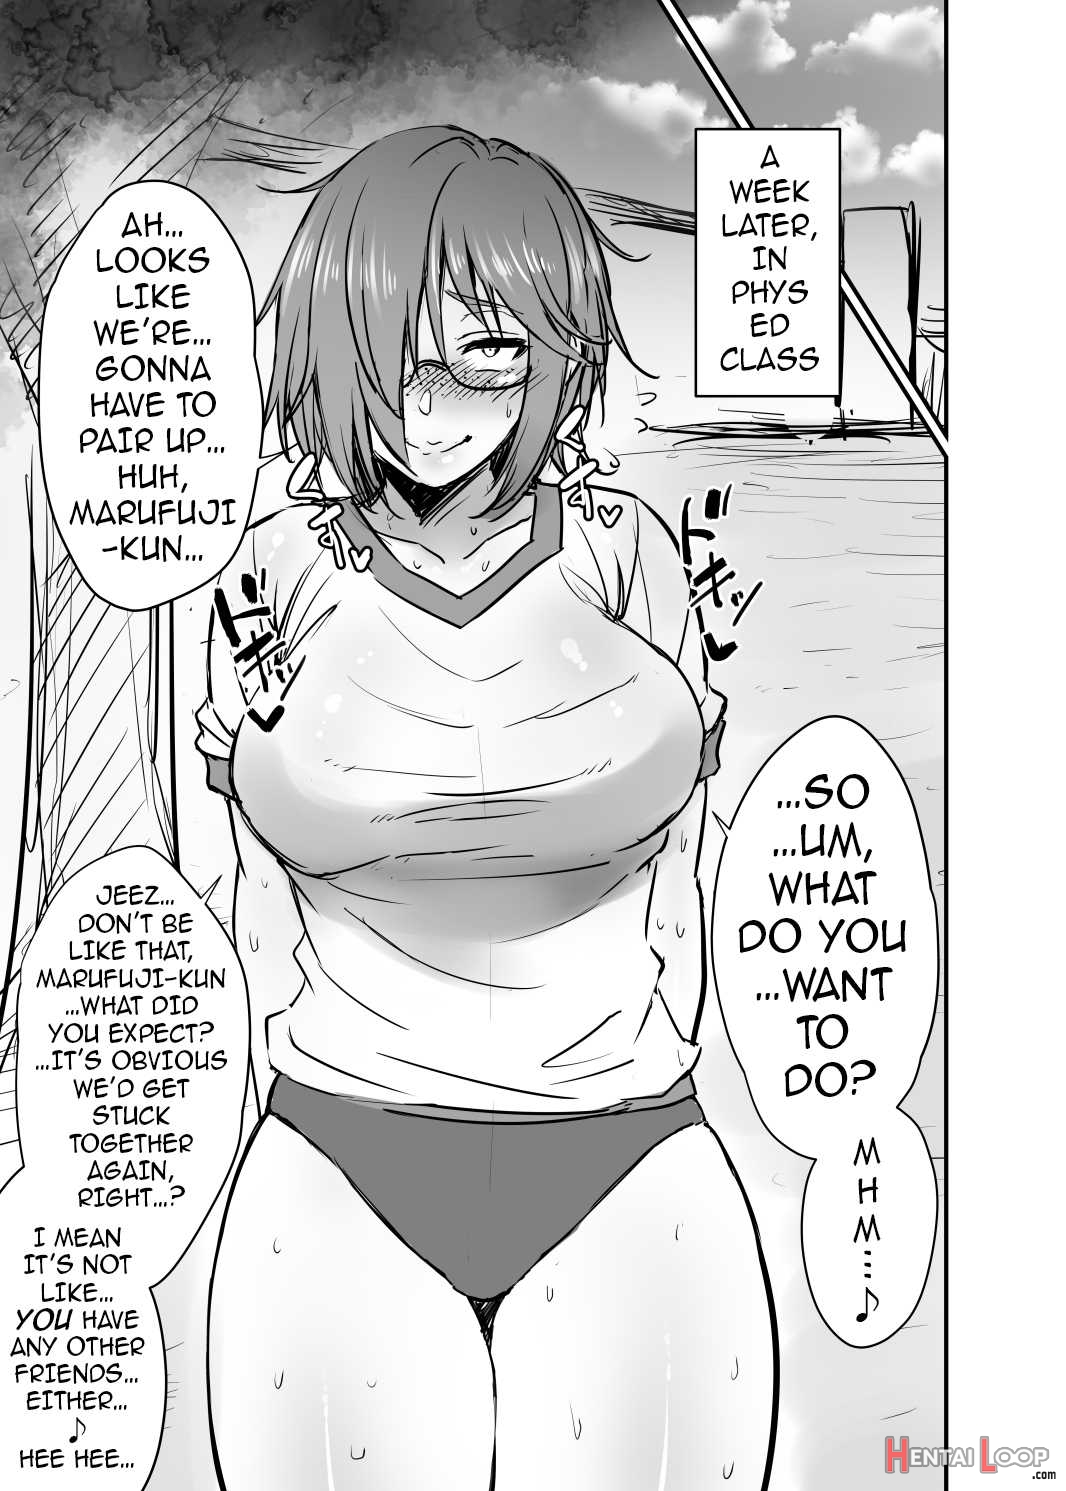 Page 7 of The Creepy Glasses Girl (by Korotsuke) - Hentai doujinshi for  free at HentaiLoop